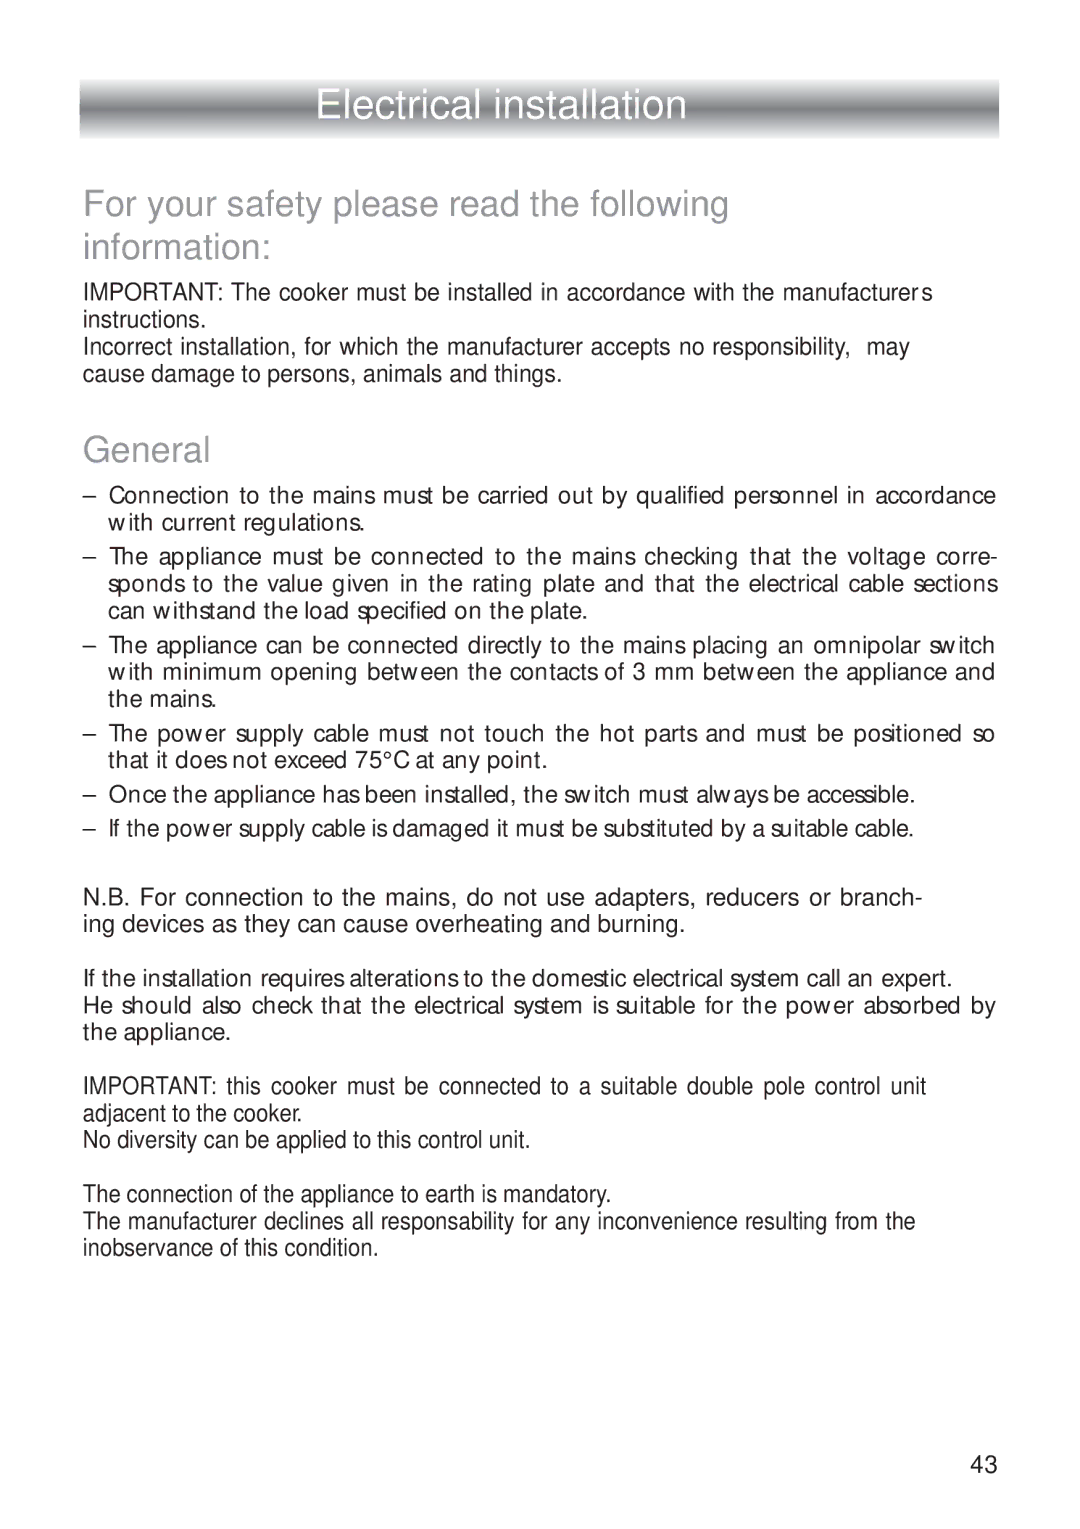 CDA RC 9020 installation instructions Electrical installation, For your safety please read the following information 